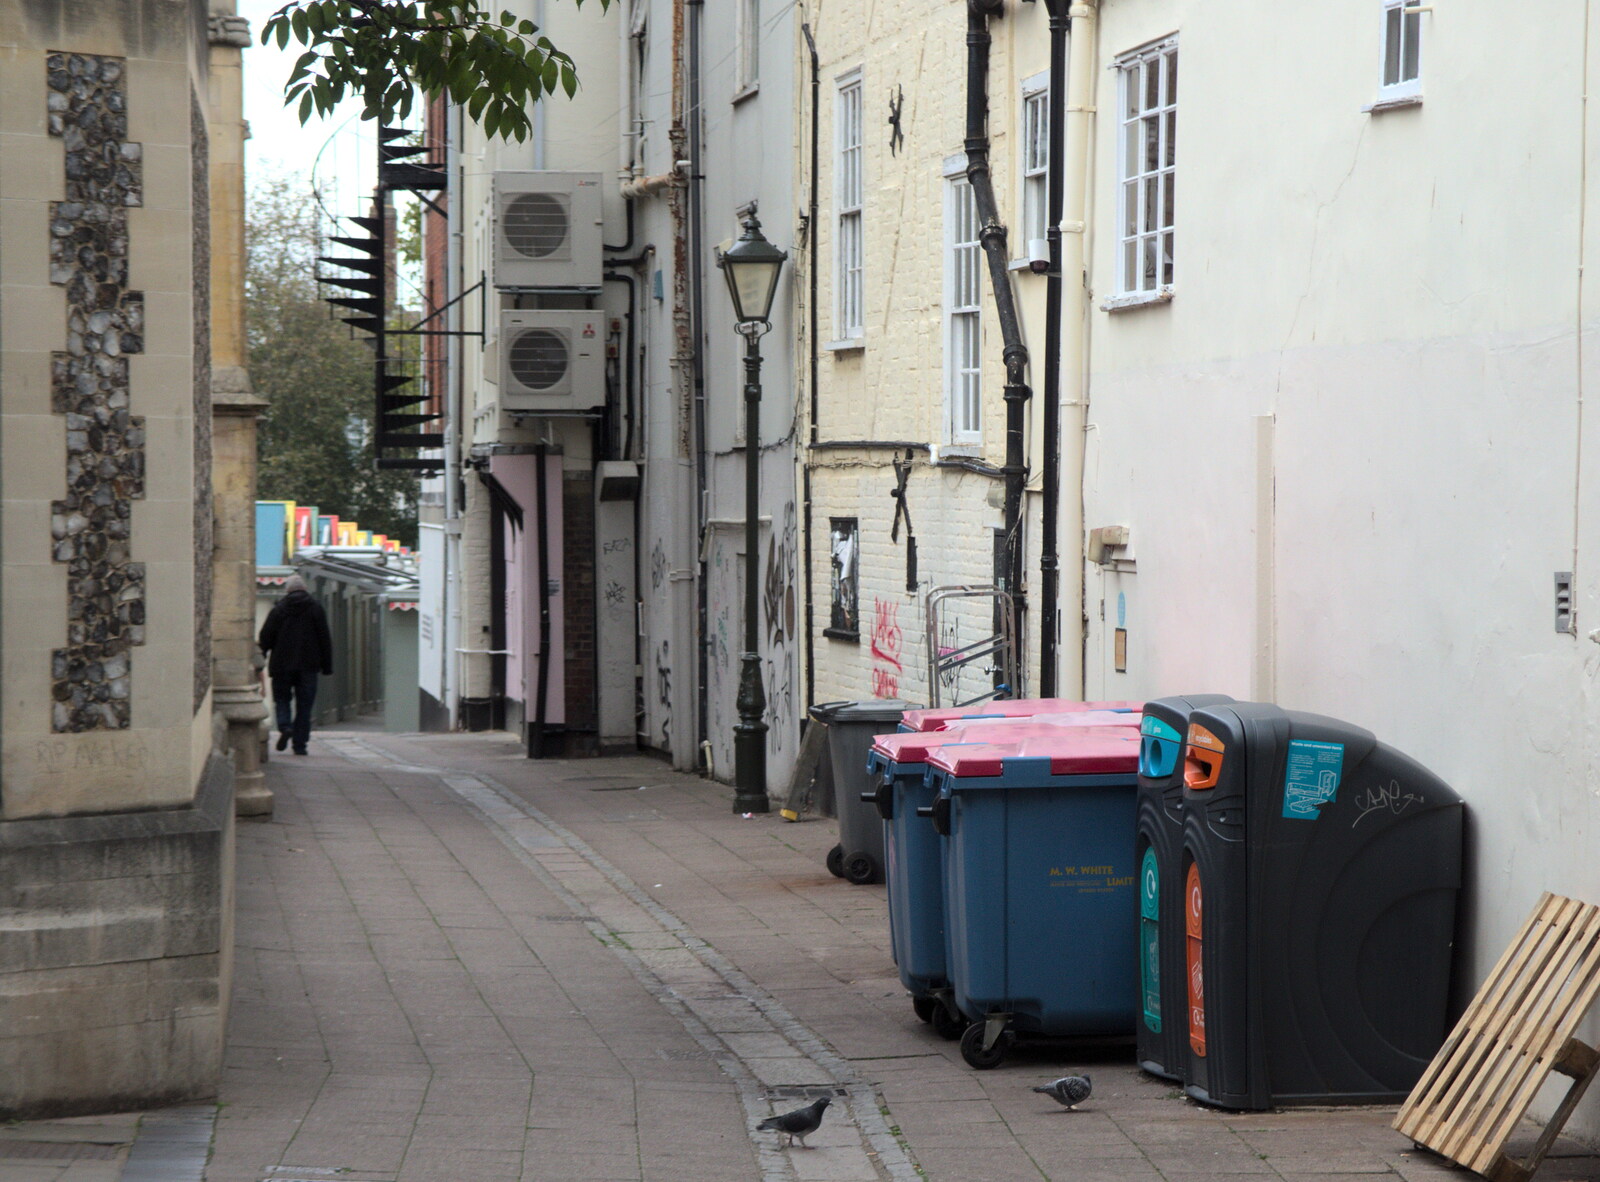 Bins and graffiti on Weaver's Lane from A Miscellany, Norwich , Norfolk - 30th September 2018